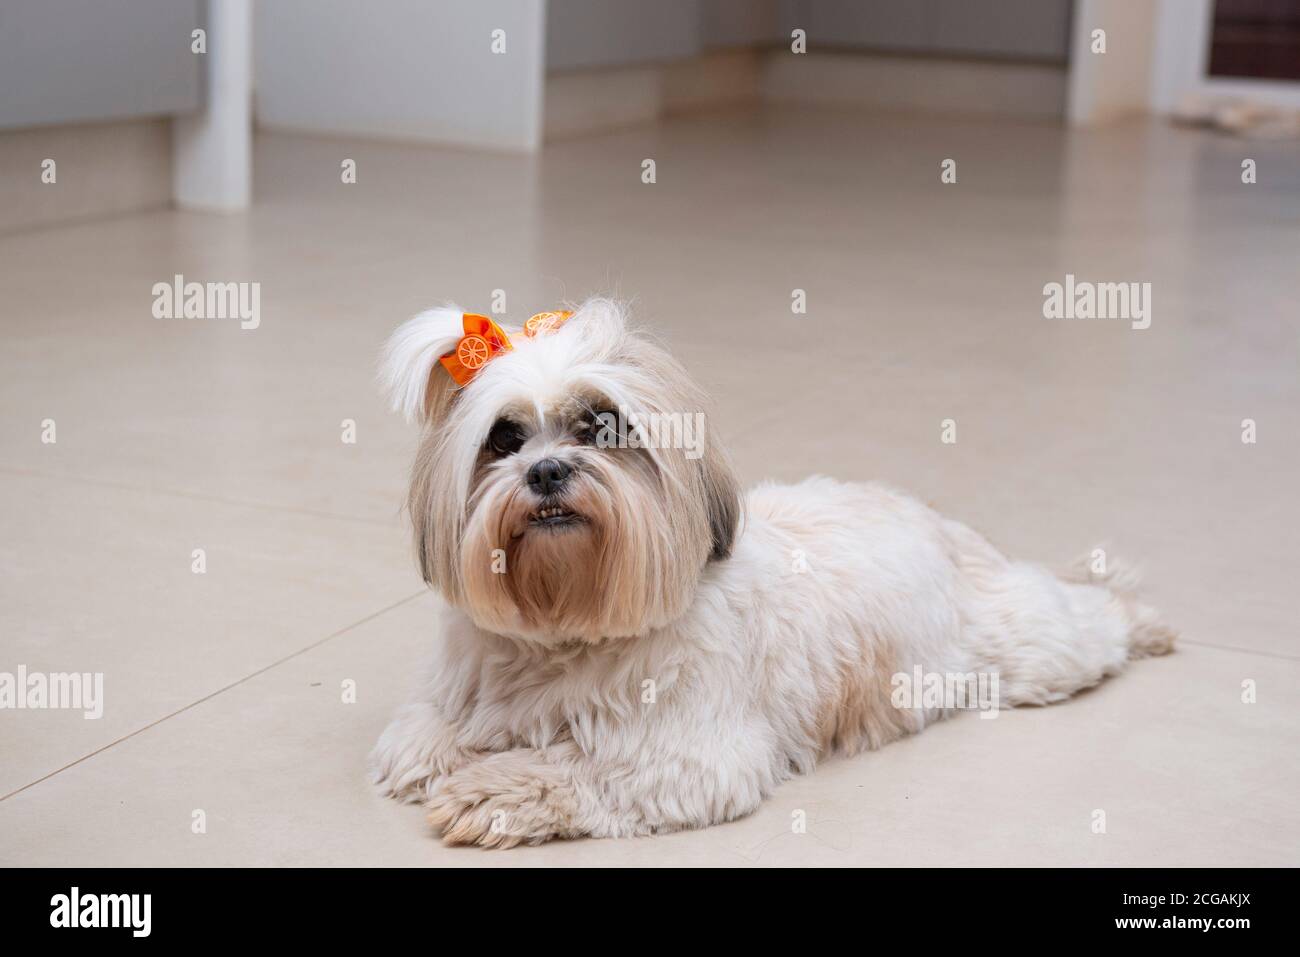 Lhasa apso lying on the floor relaxing with orange bow. small domestic animal. man's best friend. Pet concept. Stock Photo